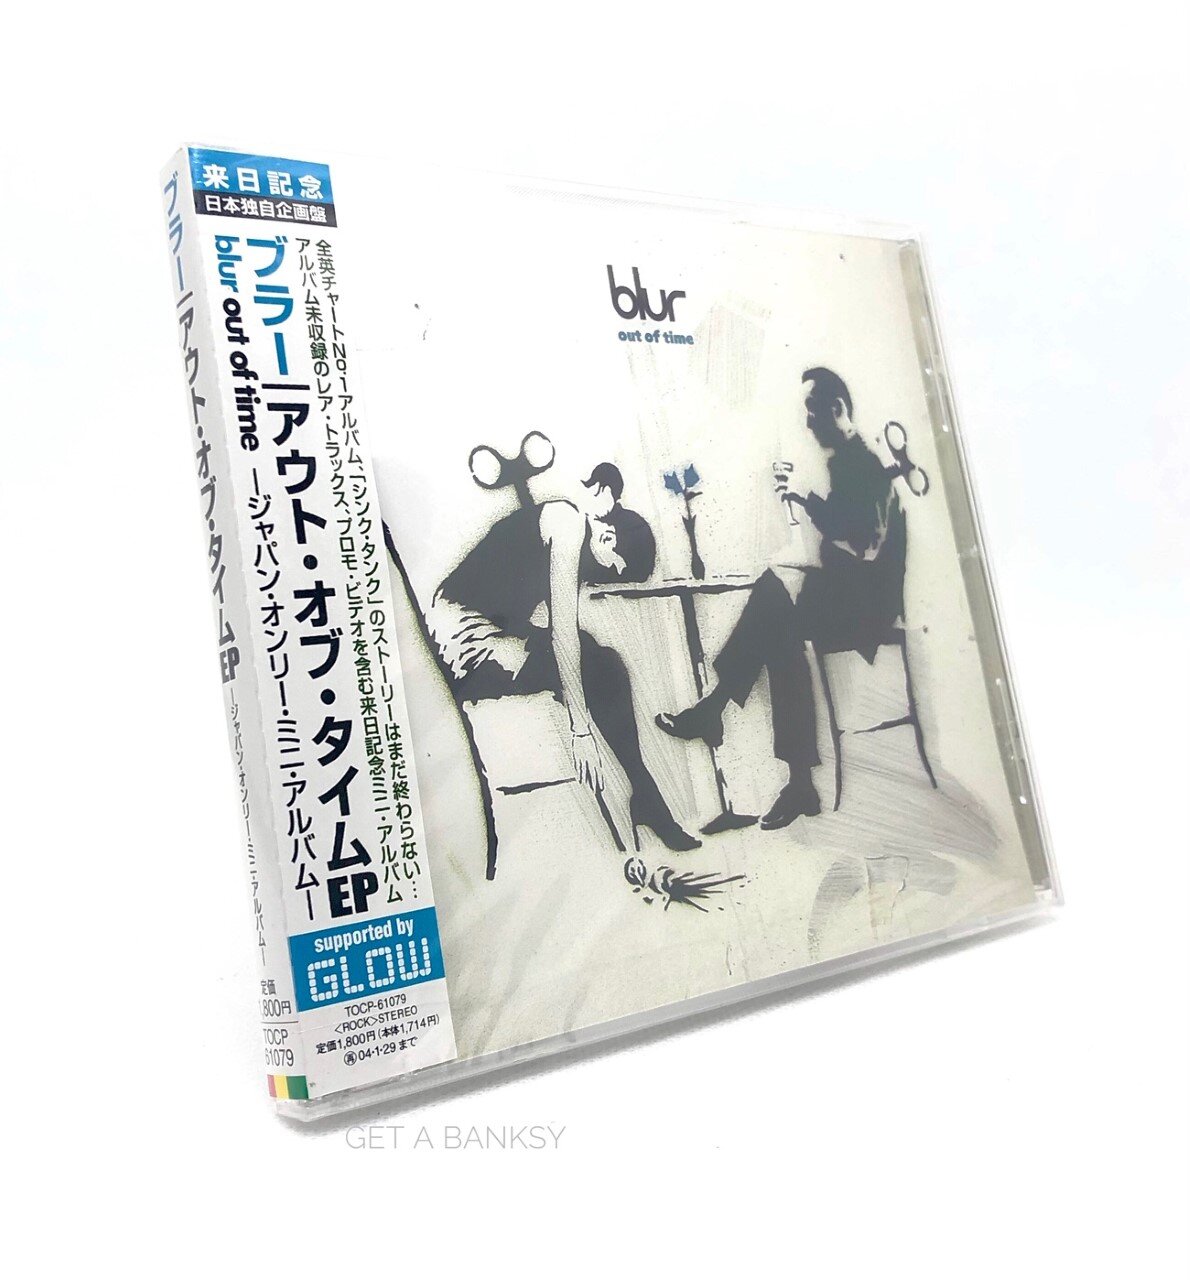 Blur Out of Time Japanese CD Banksy Cover artwork — Get a Banksy